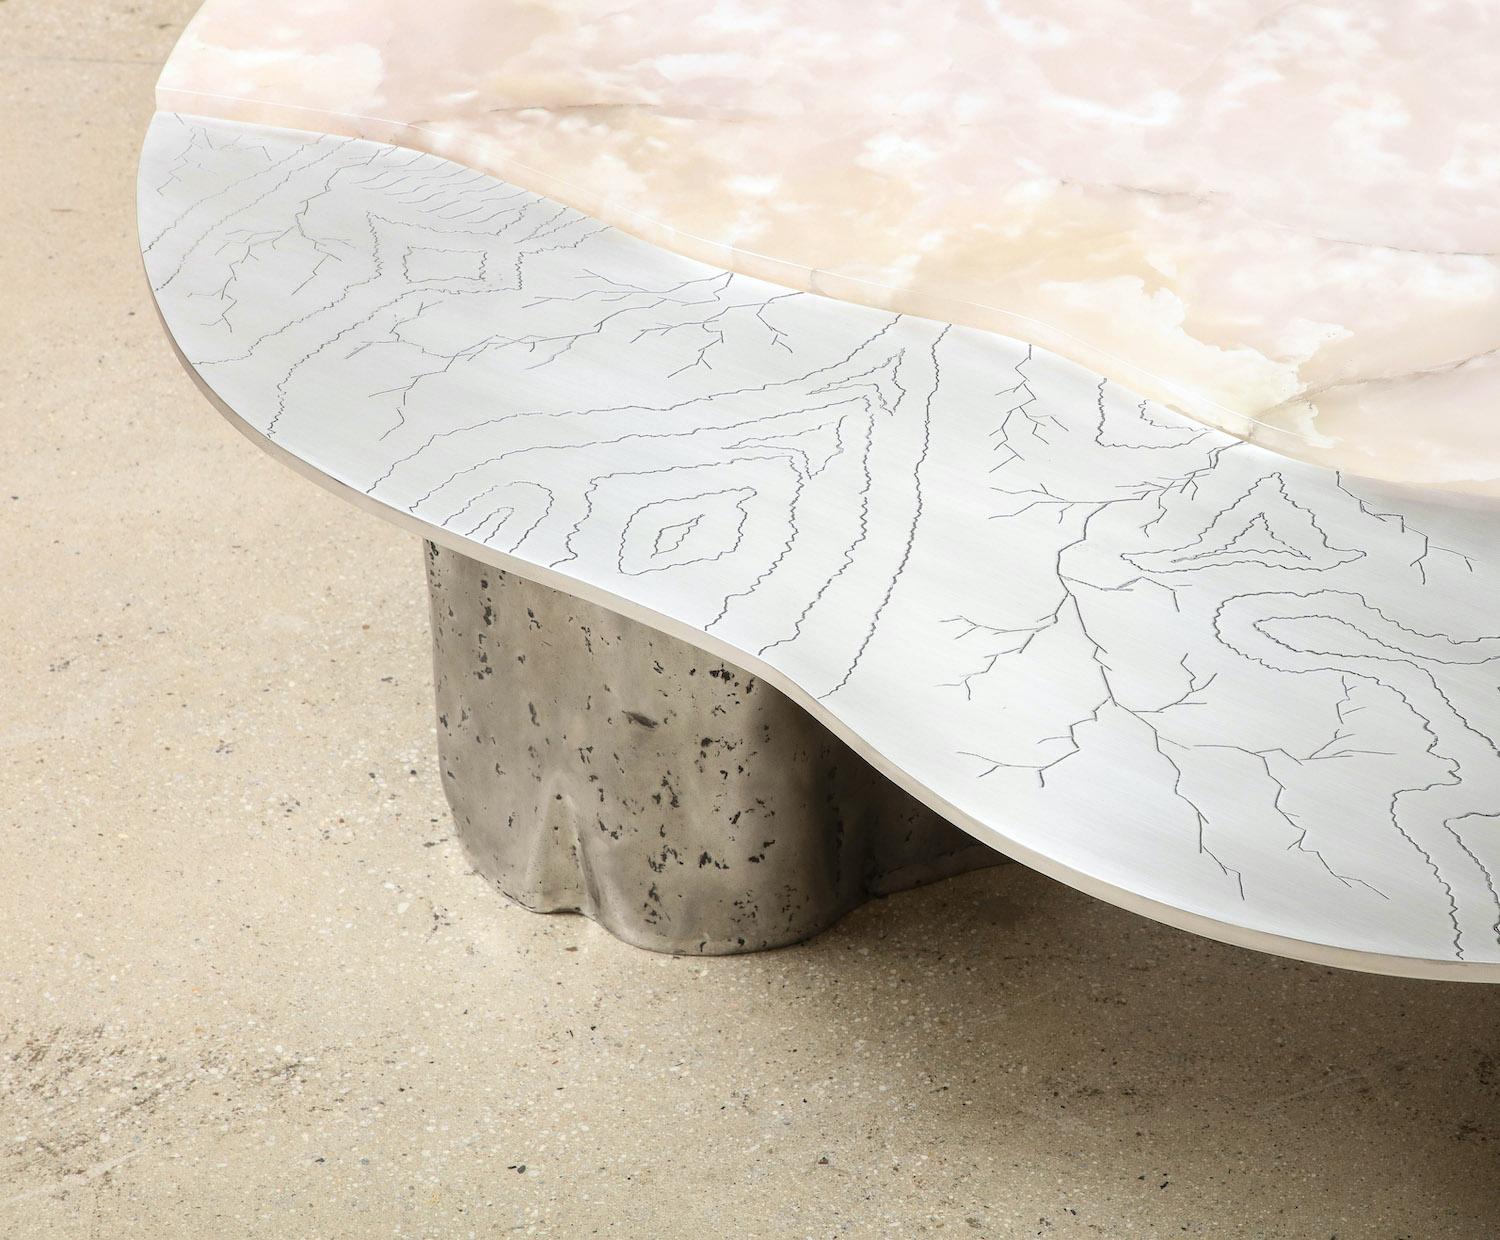 Polished & acid-etched aluminum, onyx. 3 cast & polished aluminum legs of organic shape, pale pink onyx top. The Genese series is hand-made one at a time, and each example is unique in size and shape. This is the first example made using aluminum.